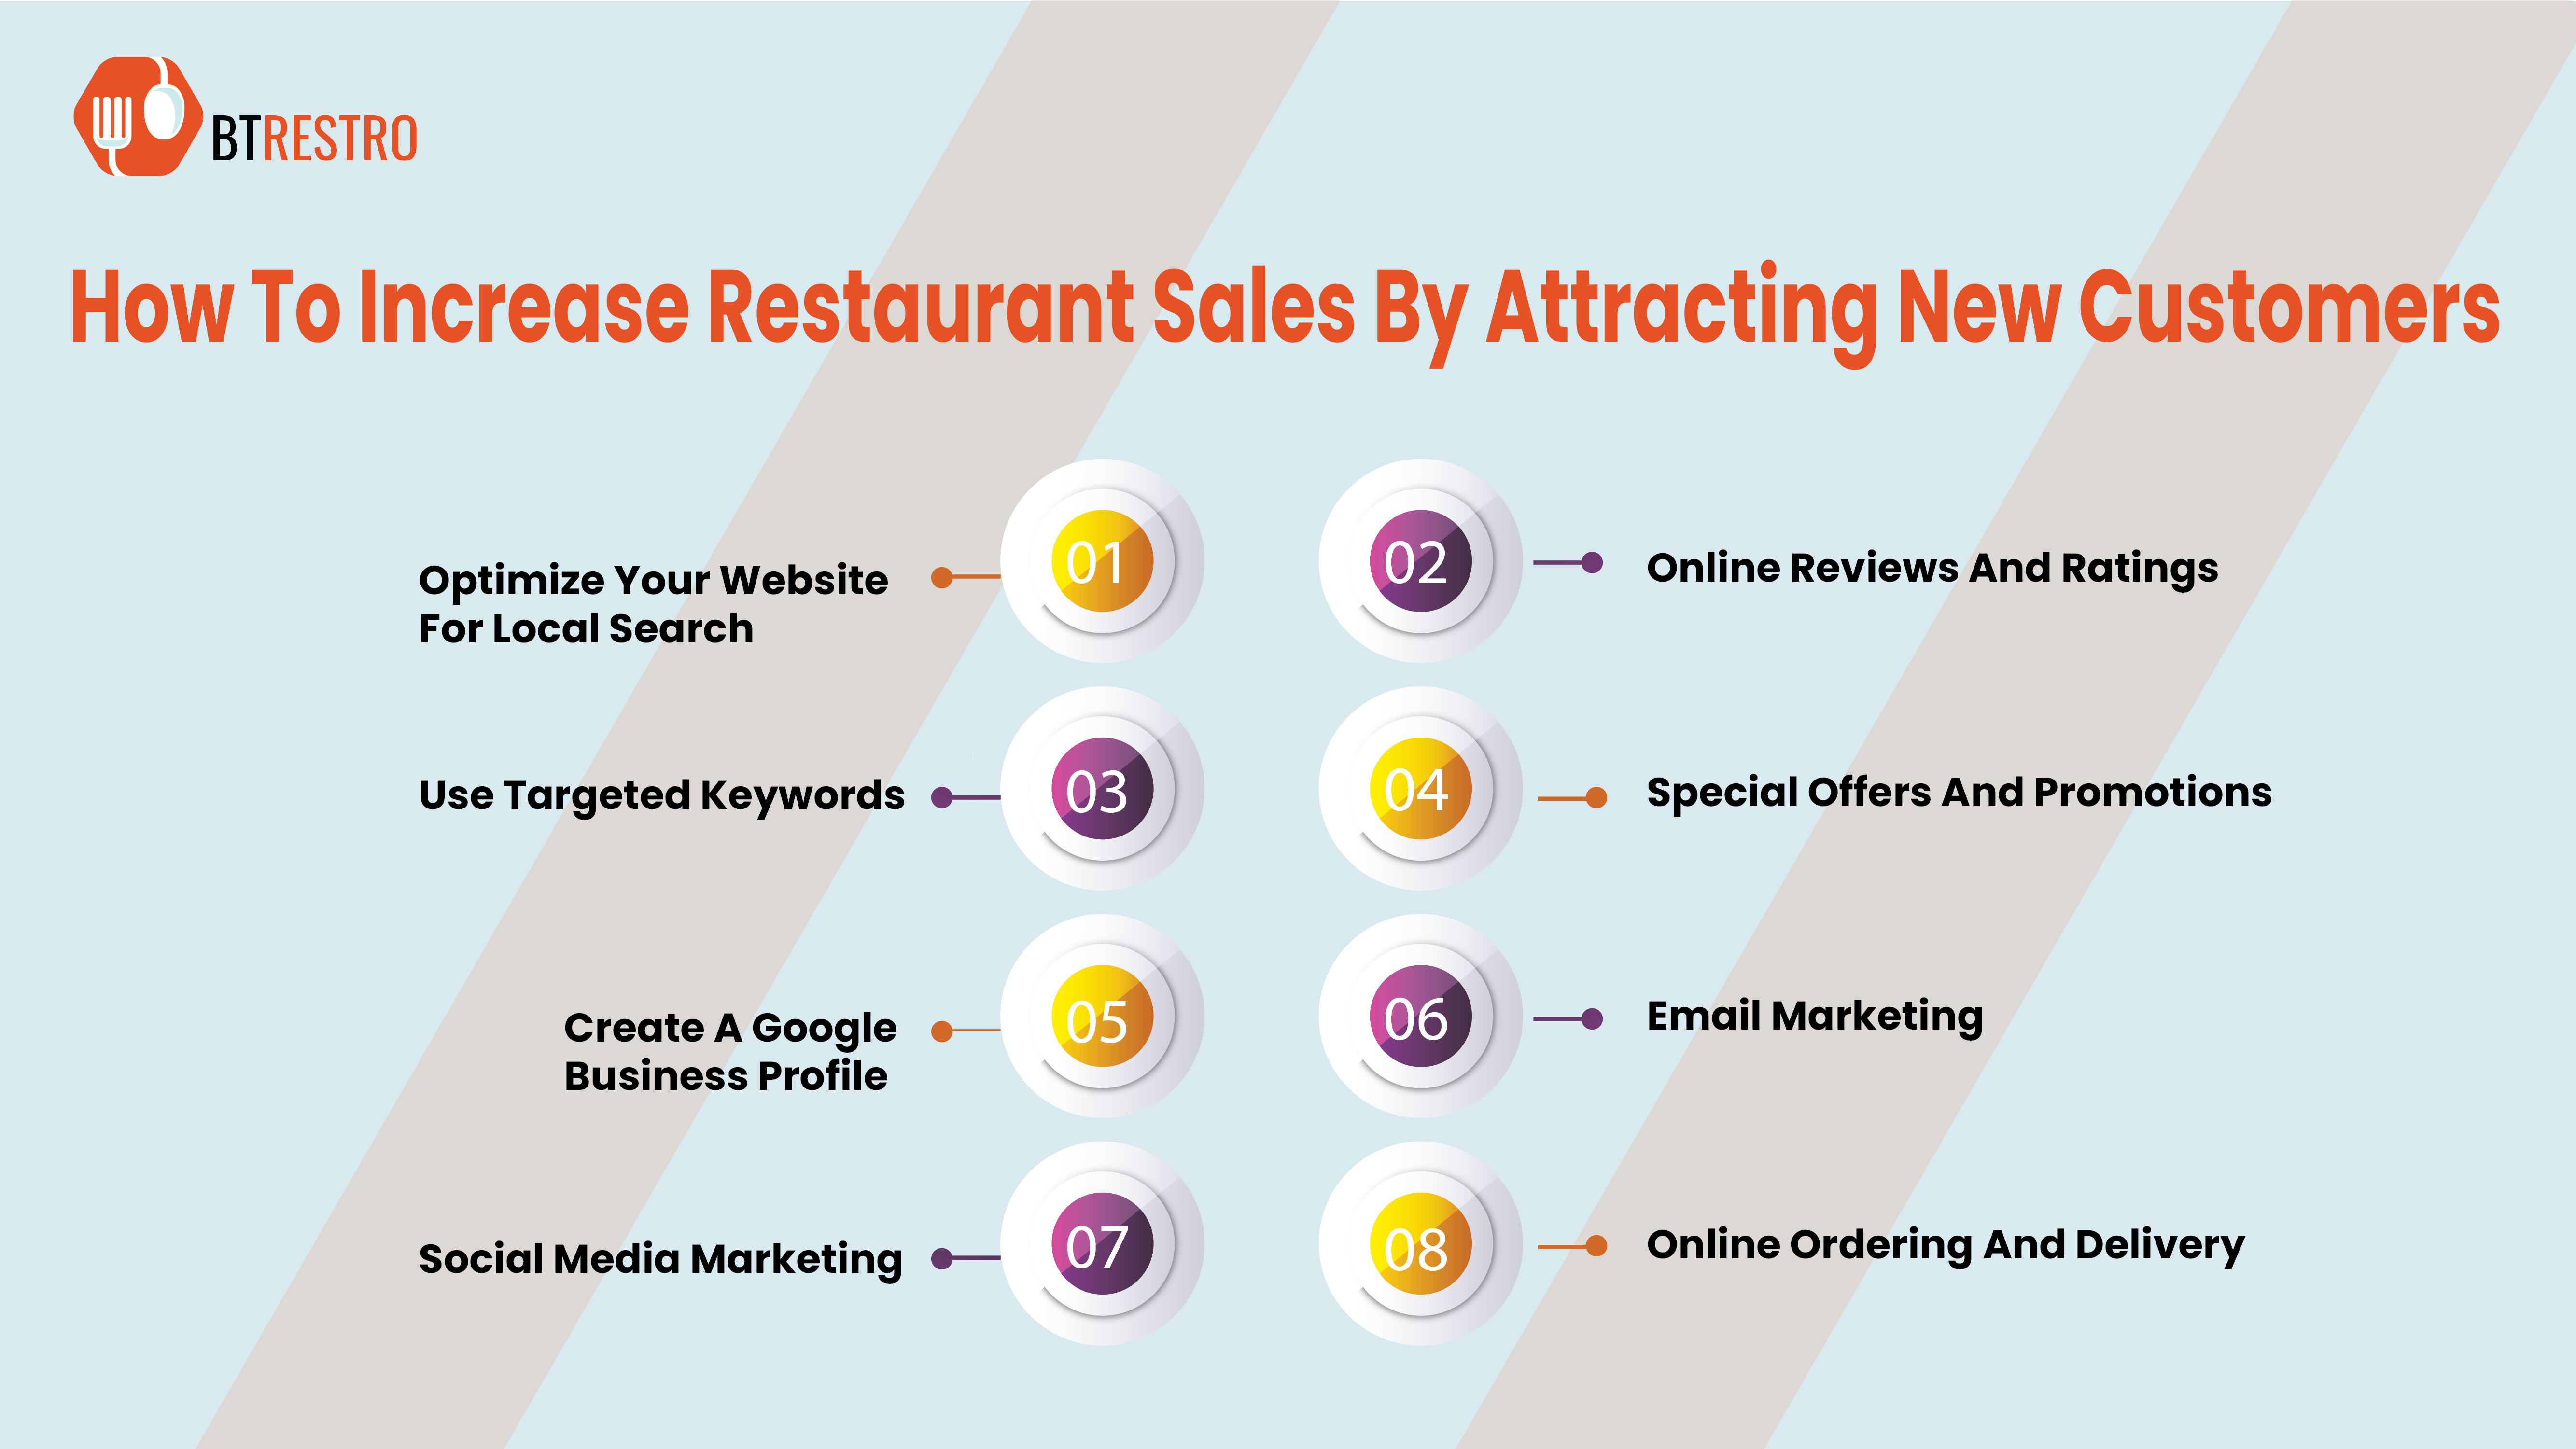 How To Increase Restaurant Sales By Attracting New Customers